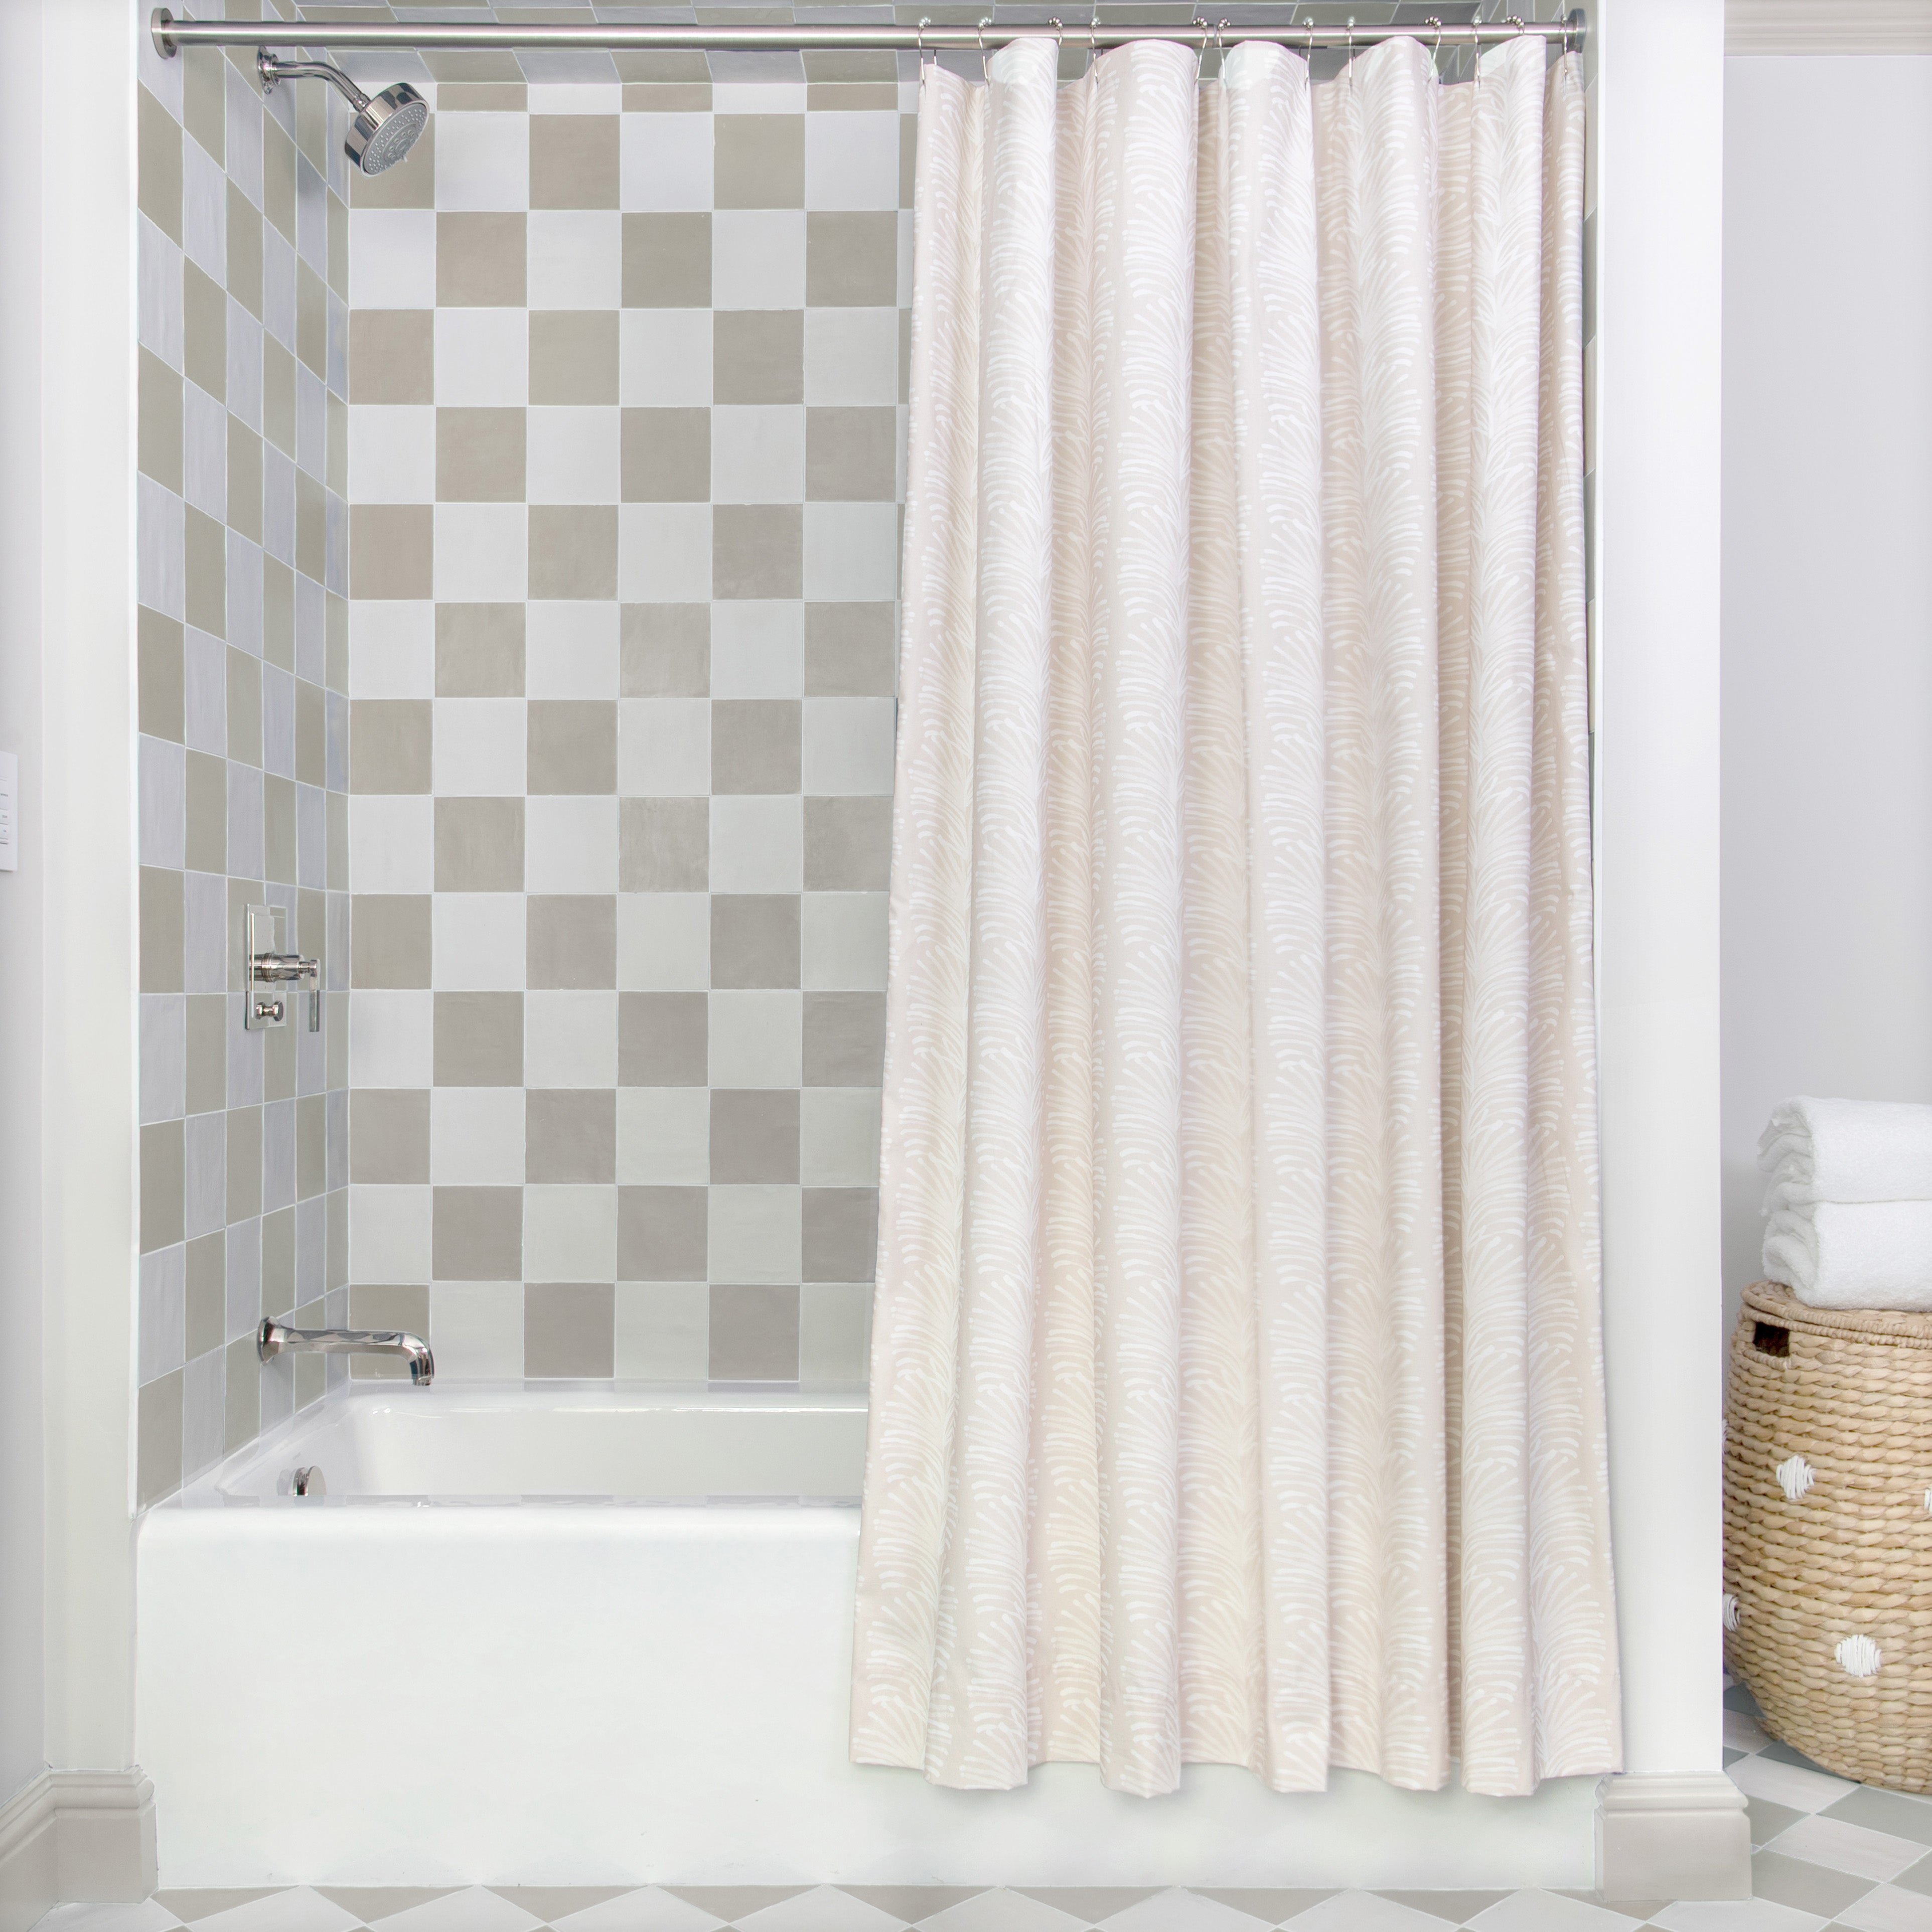 Bath styled with Beige Botanical Stripe Printed Shower Curtain on metal rod with light brown and white checkered wallpaper